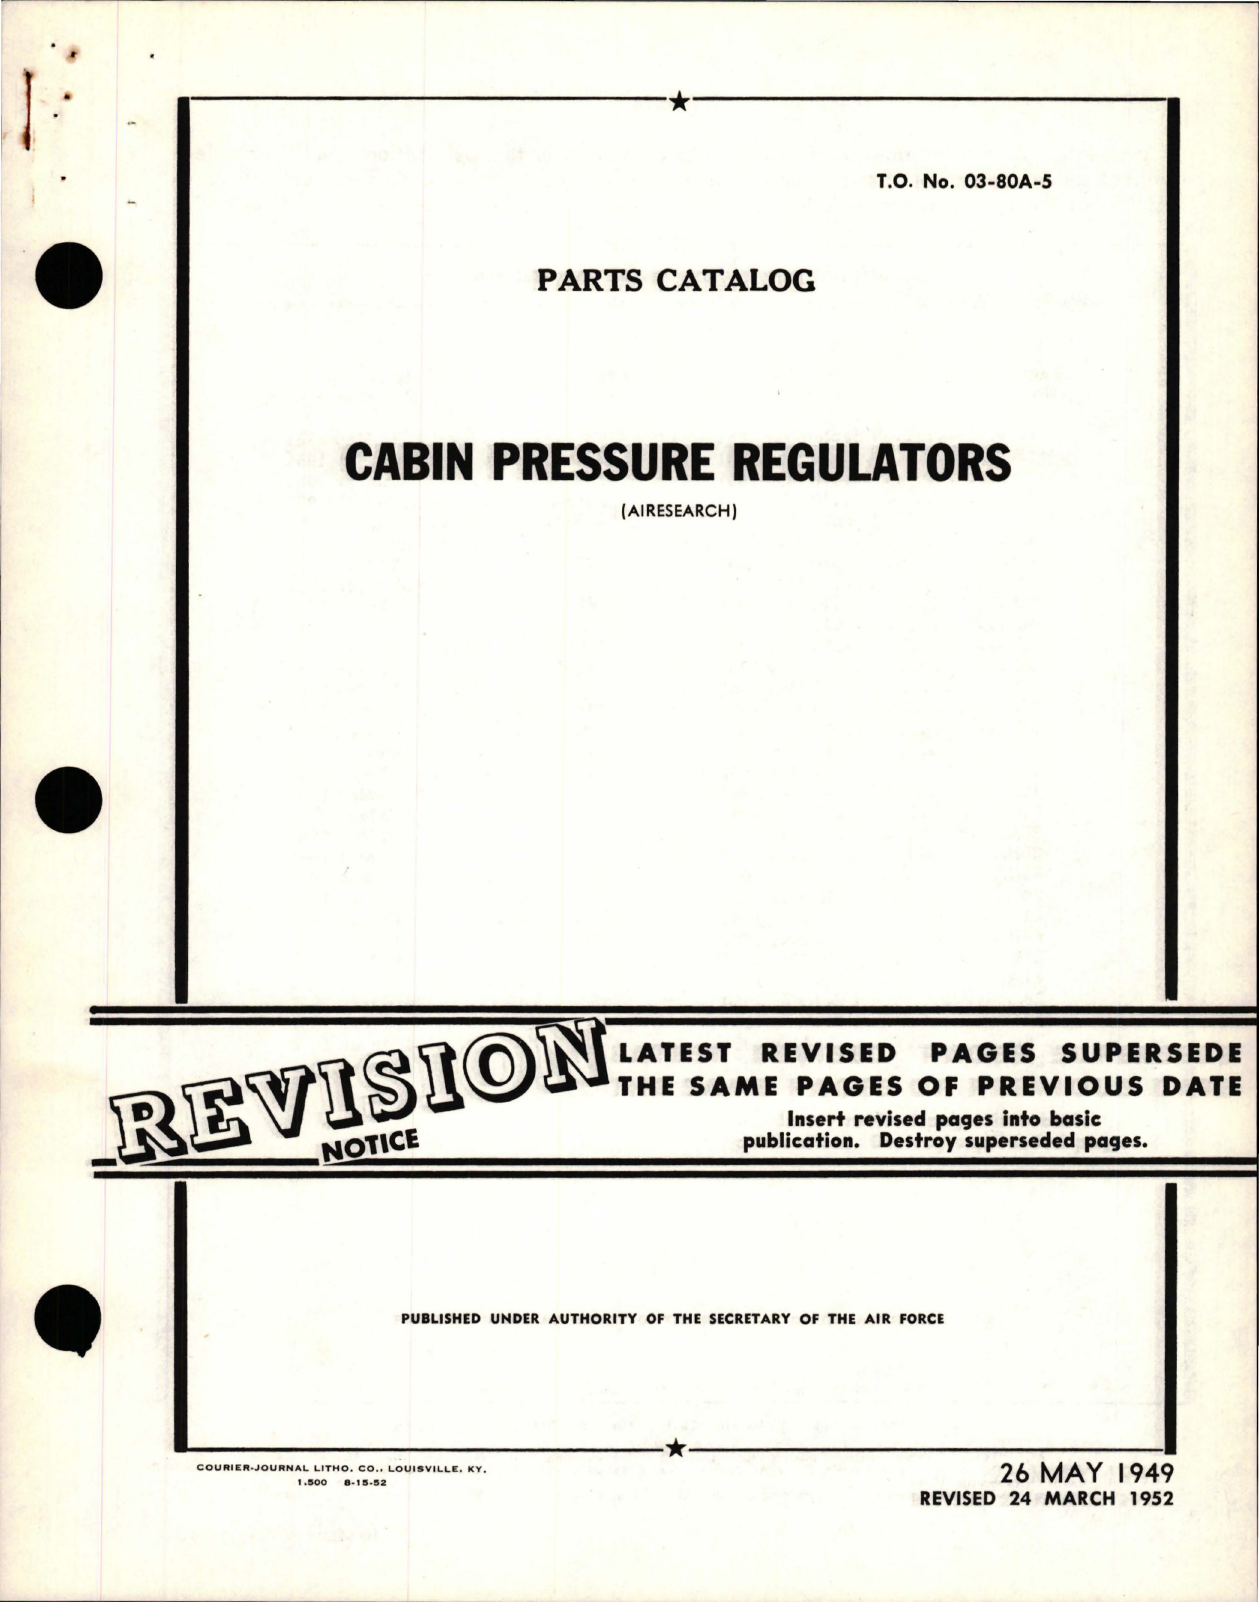 Sample page 1 from AirCorps Library document: Parts Catalog for Cabin Pressure Regulators